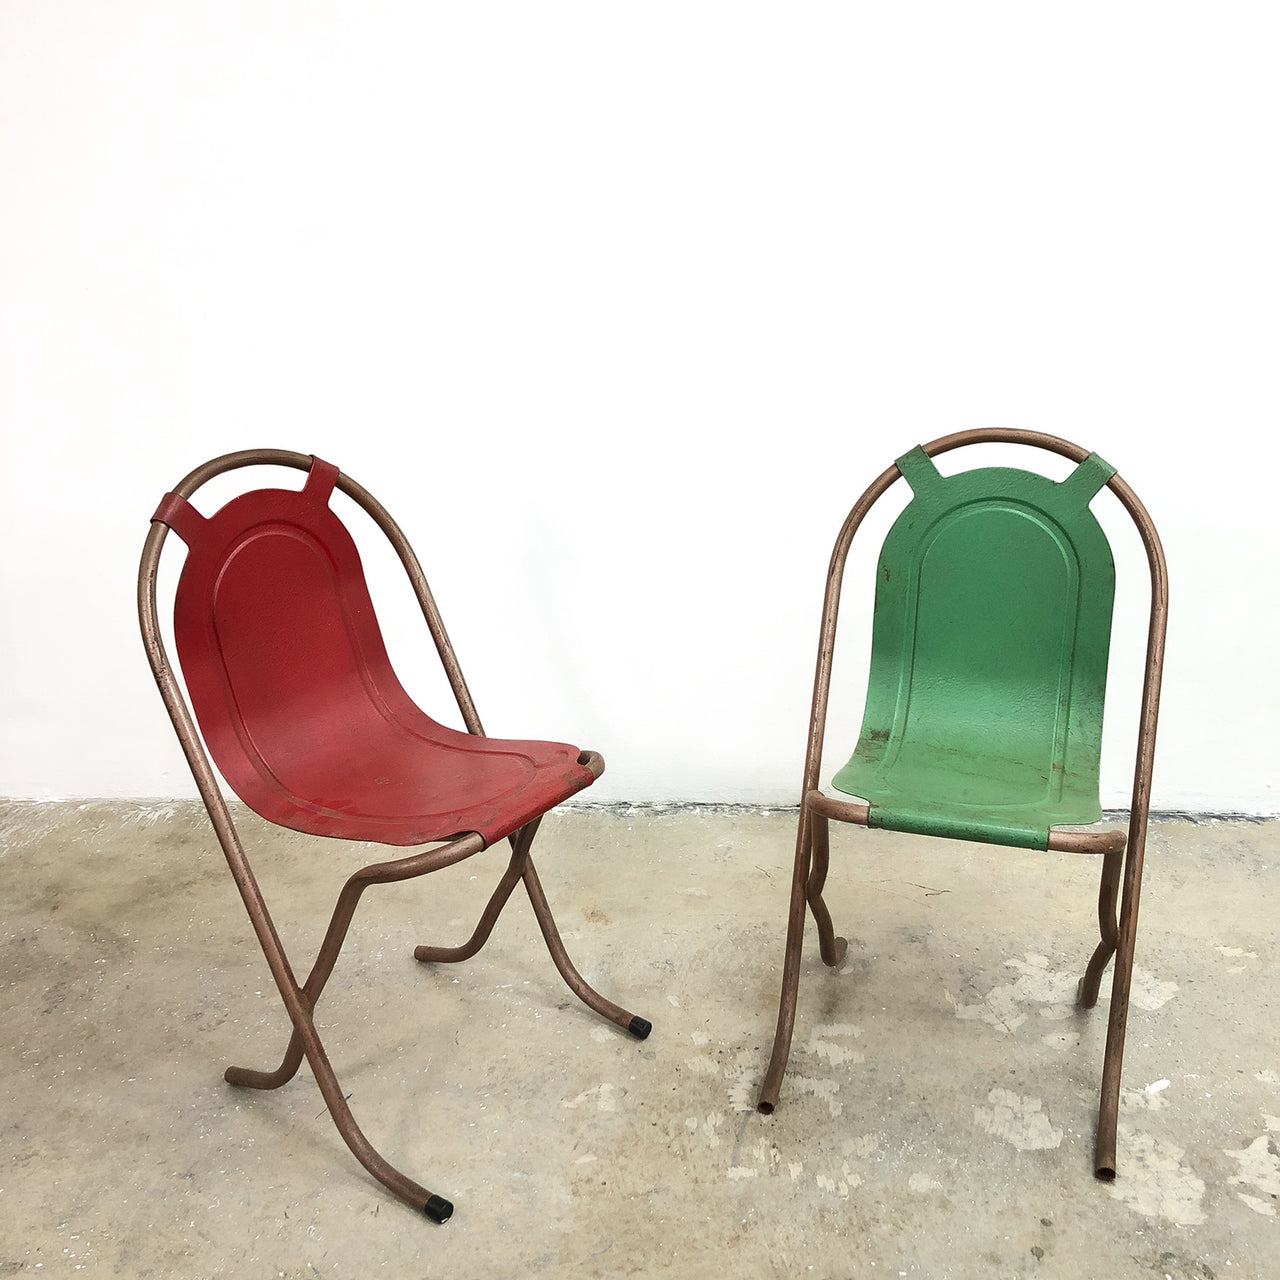 Vintage Mid Century Sebel Metal Stacking Chairs - Price Per Chair